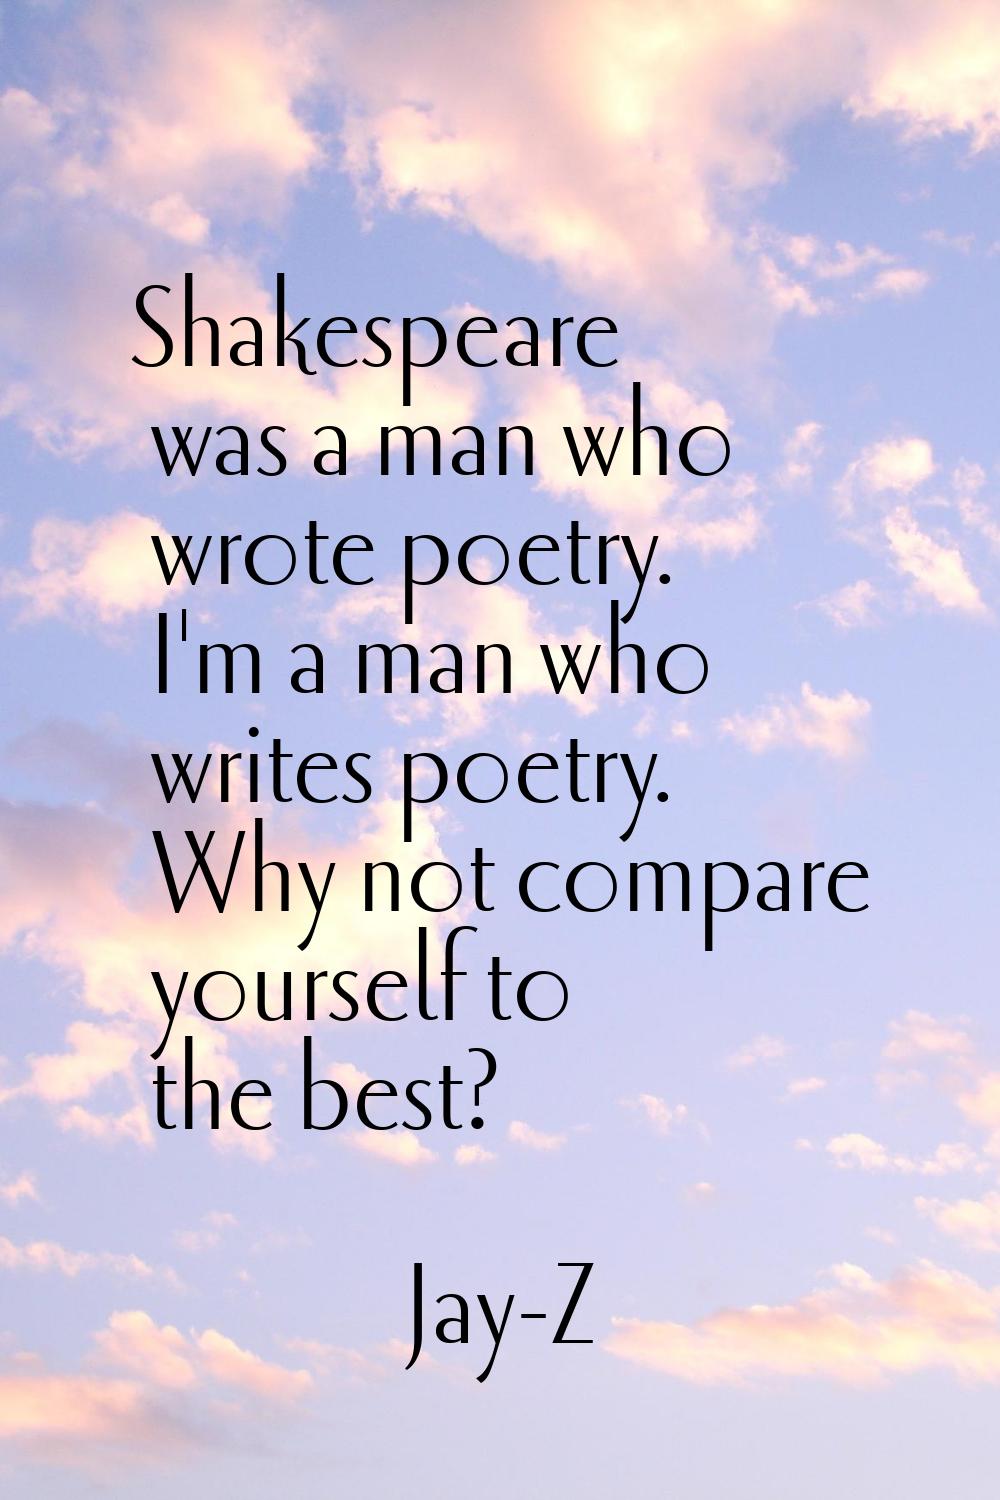 Shakespeare was a man who wrote poetry. I'm a man who writes poetry. Why not compare yourself to th